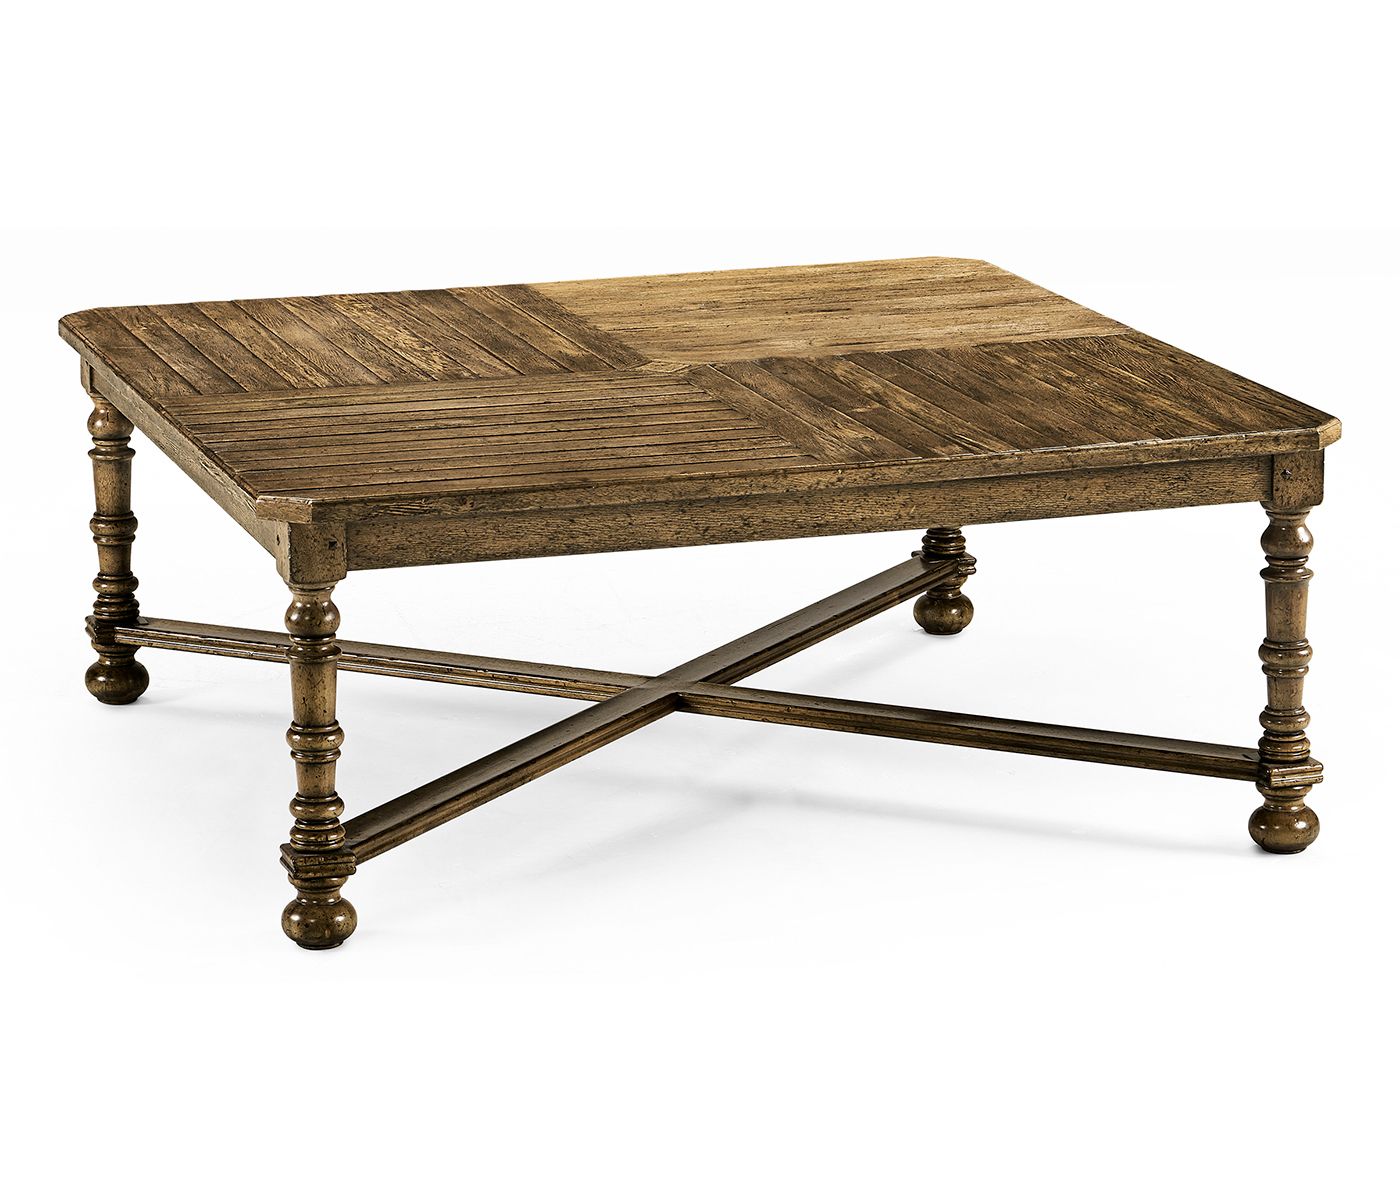 Medium Driftwood Large Square Parquet Coffee Table With Gray Driftwood And Metal Coffee Tables (View 15 of 15)